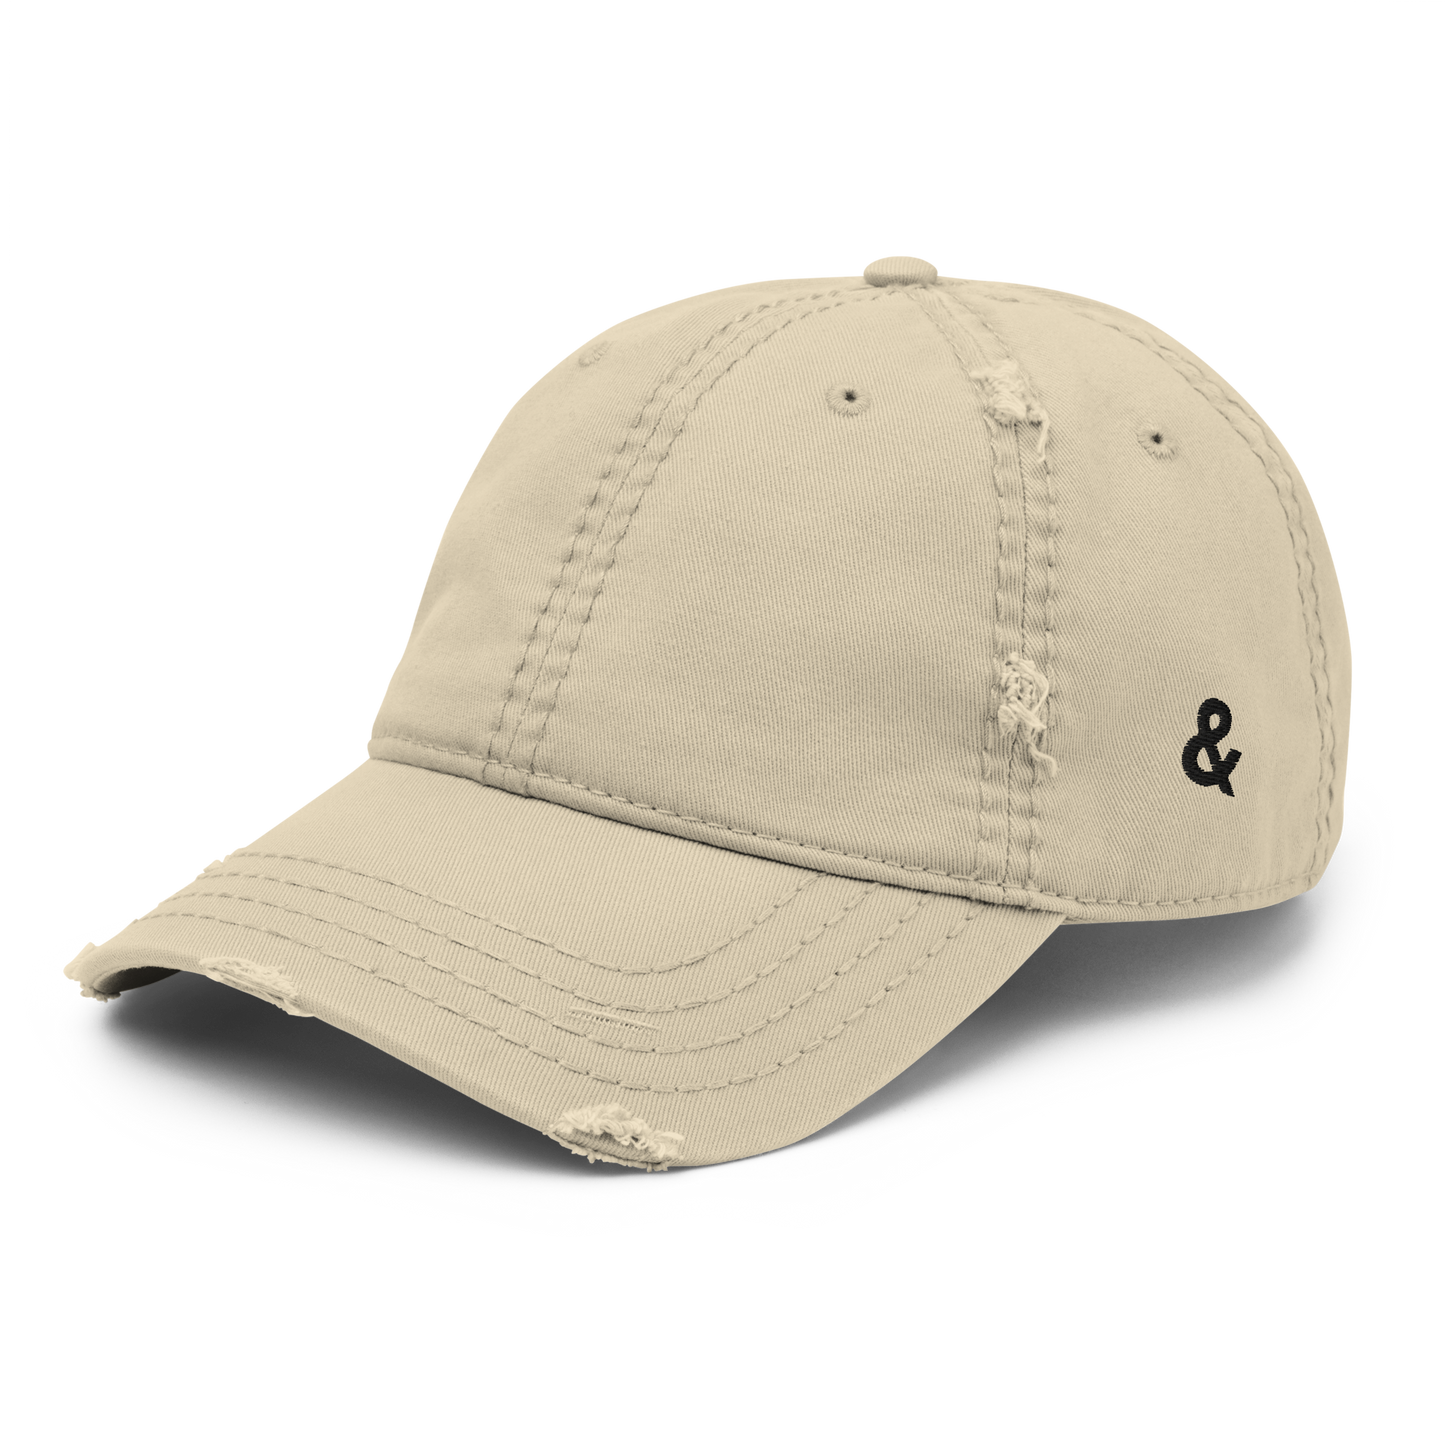 Embroidered "Ampersand" Distressed Cap